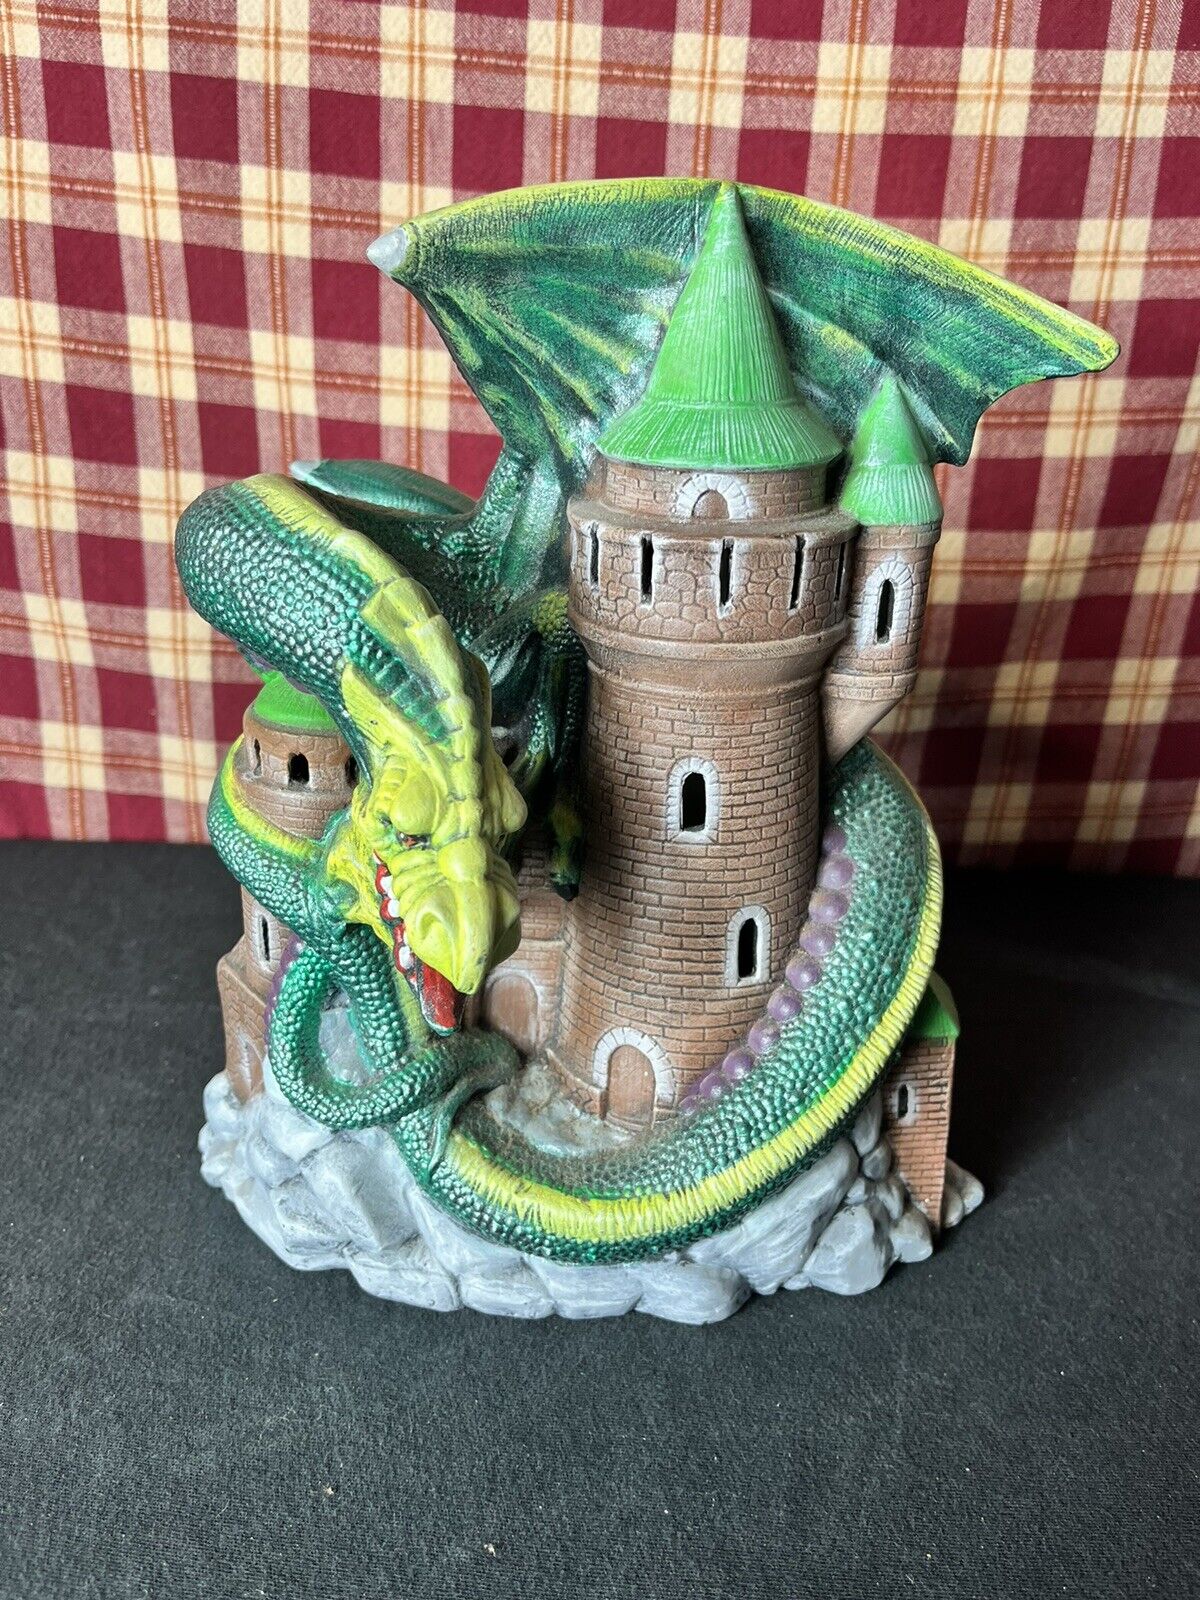 Green Doc Holiday Molds Ceramic Dragon Figurine (DHM,  1996) (See Pictures)